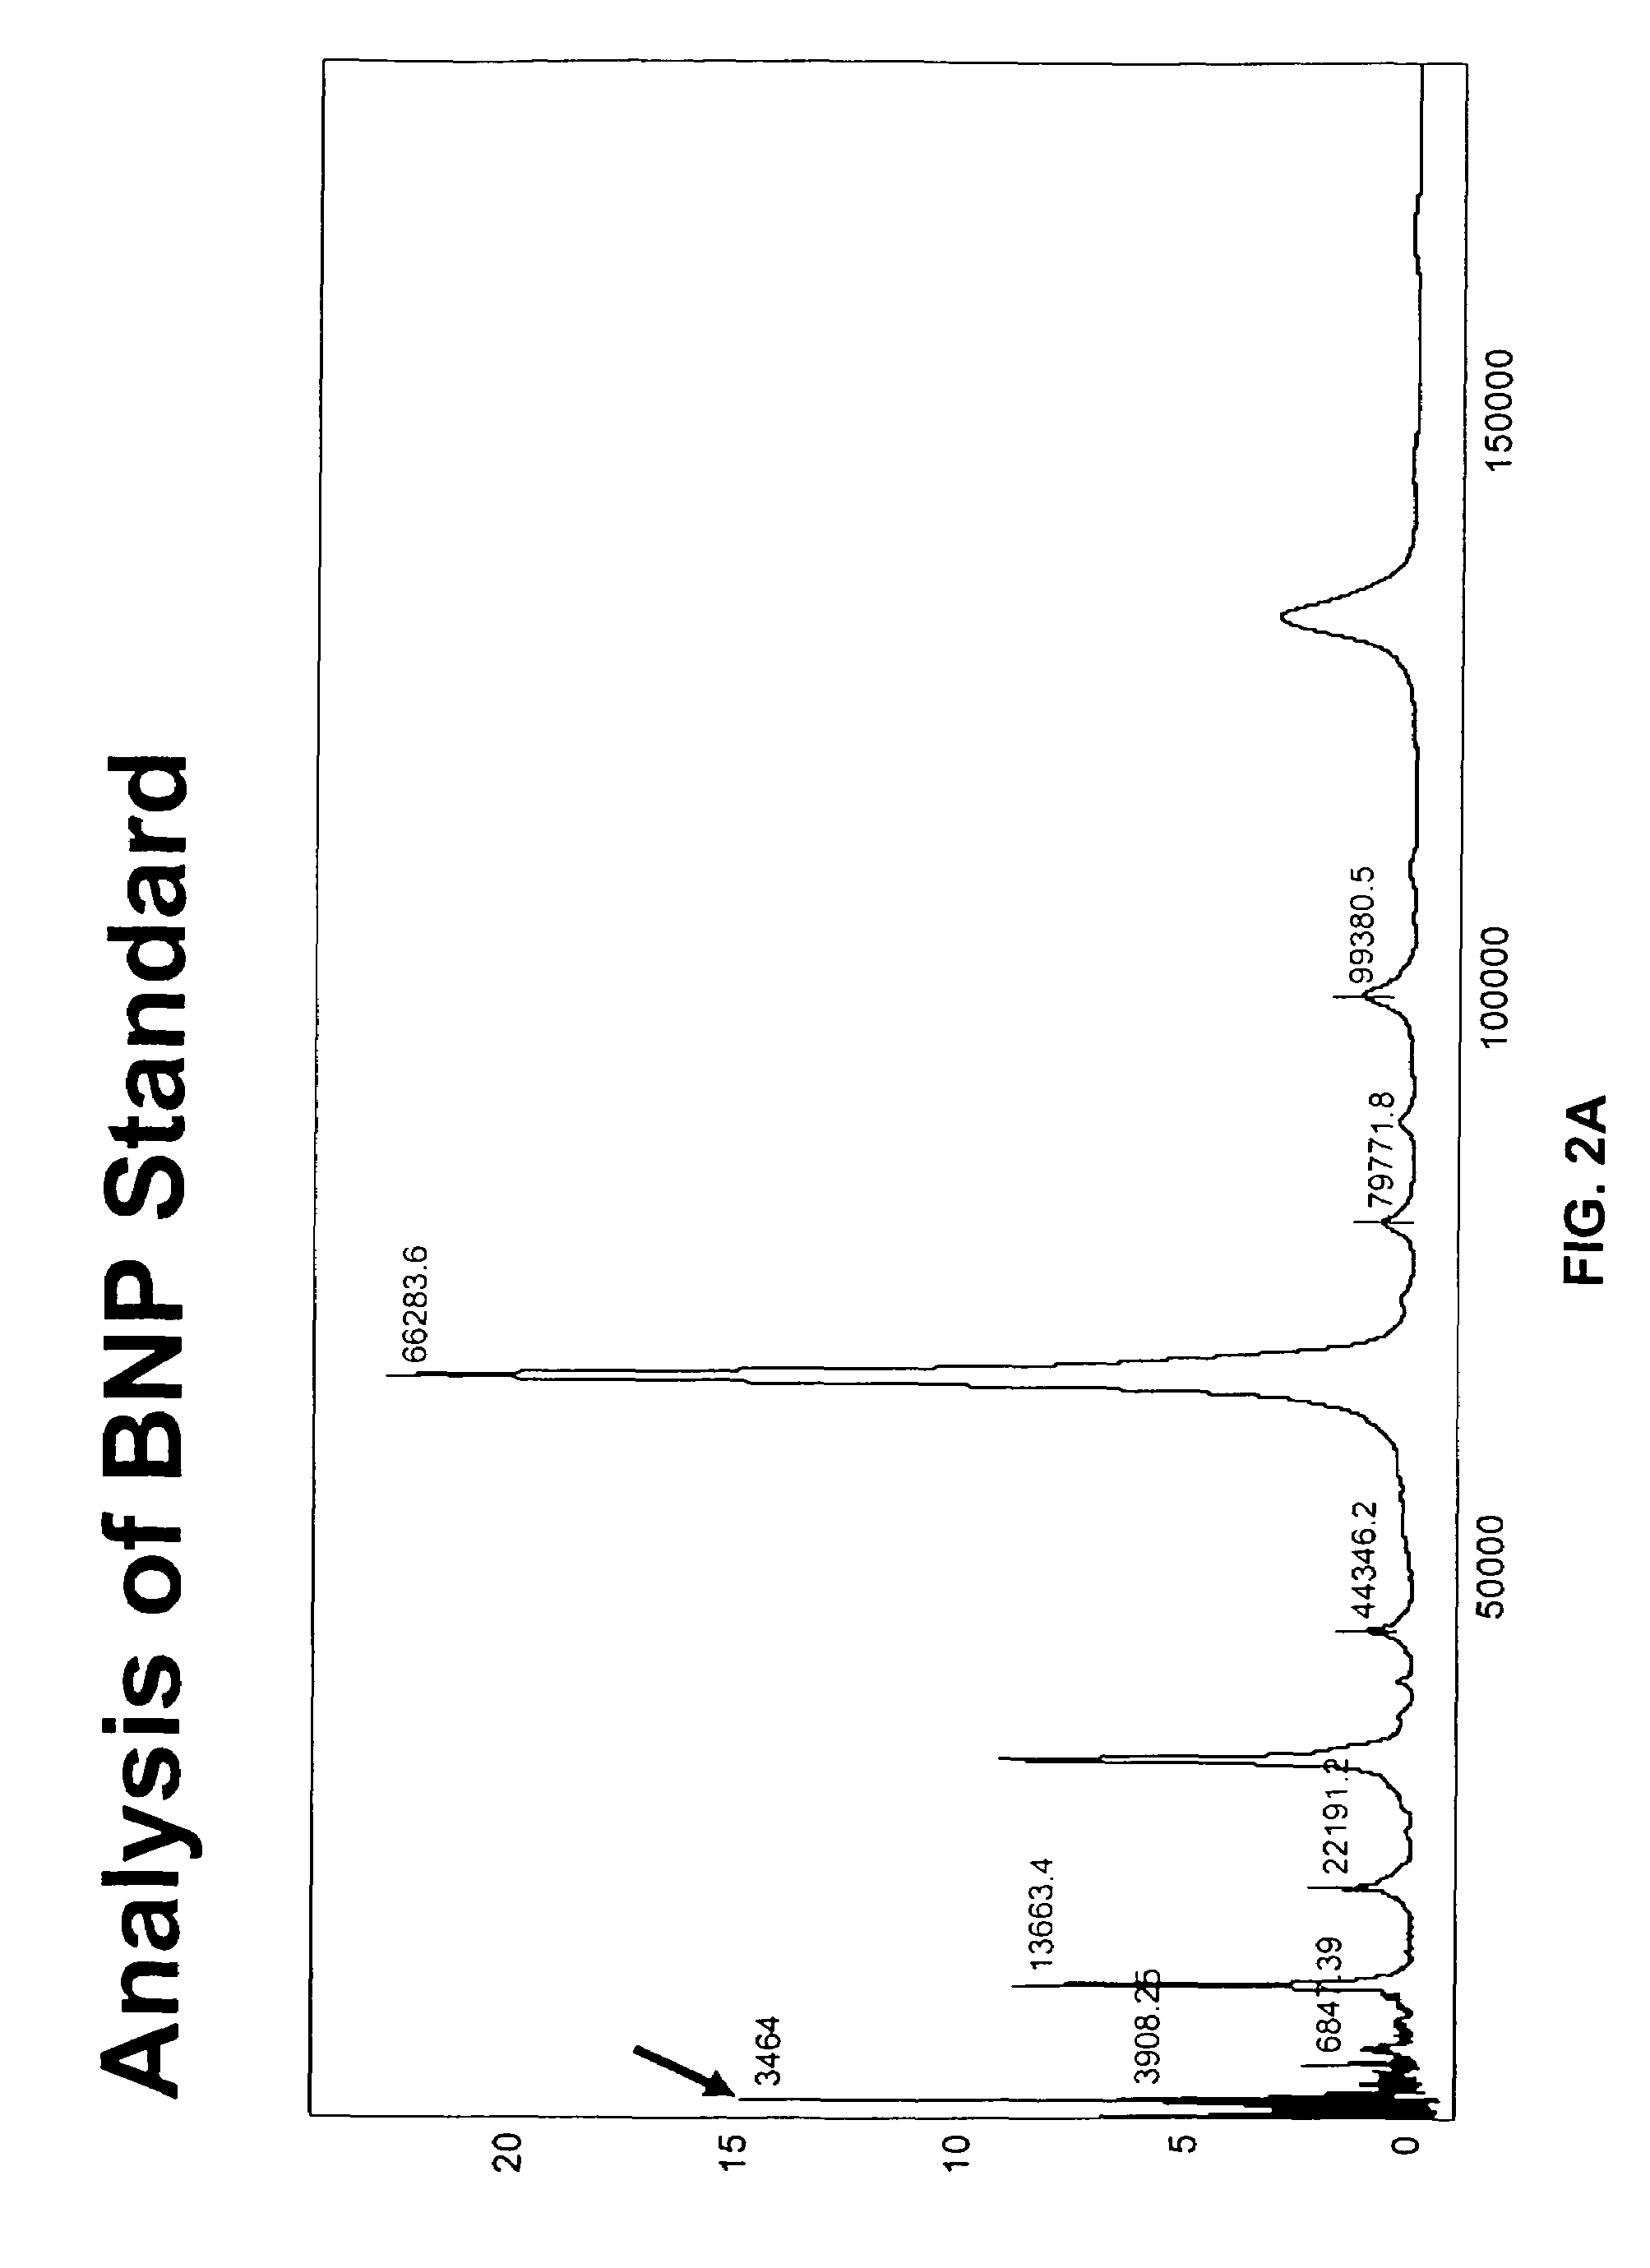 Polypeptides related to natriuretic peptides and methods of their identification and use